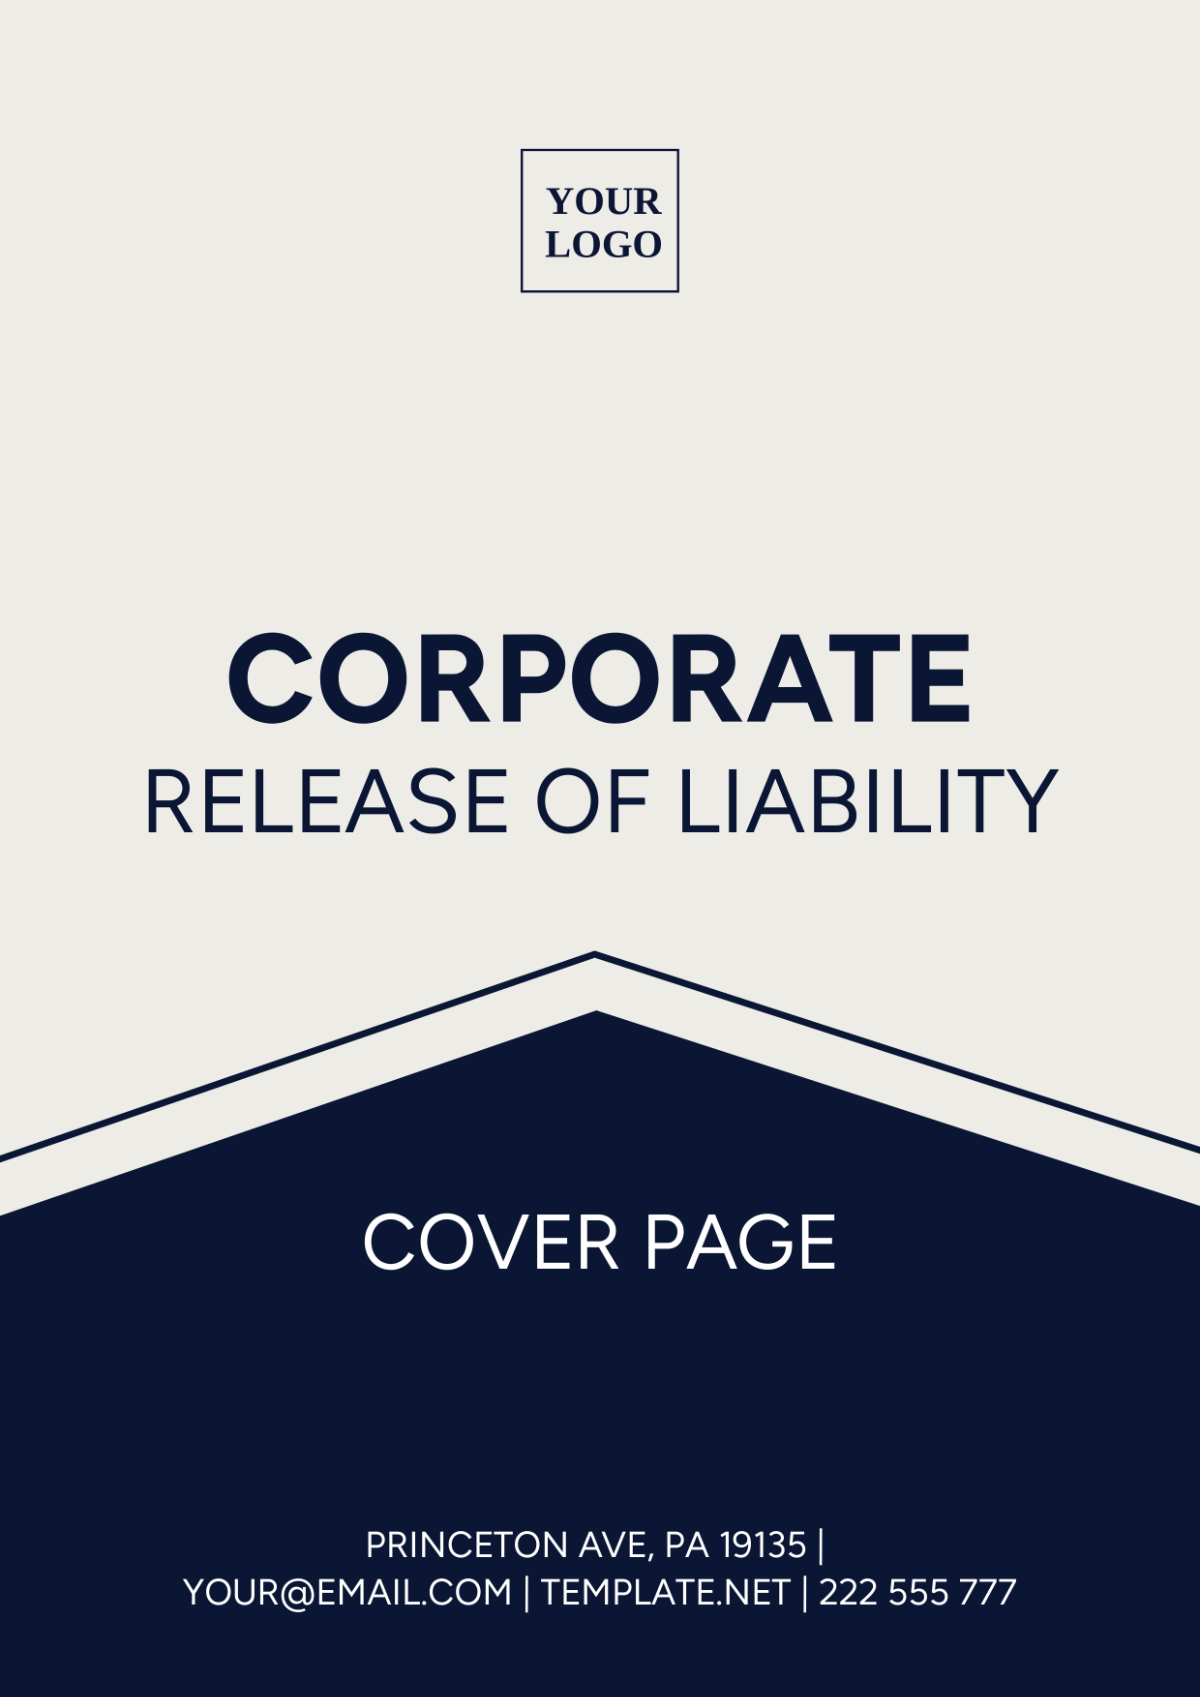 Corporate Release of Liability Cover Page